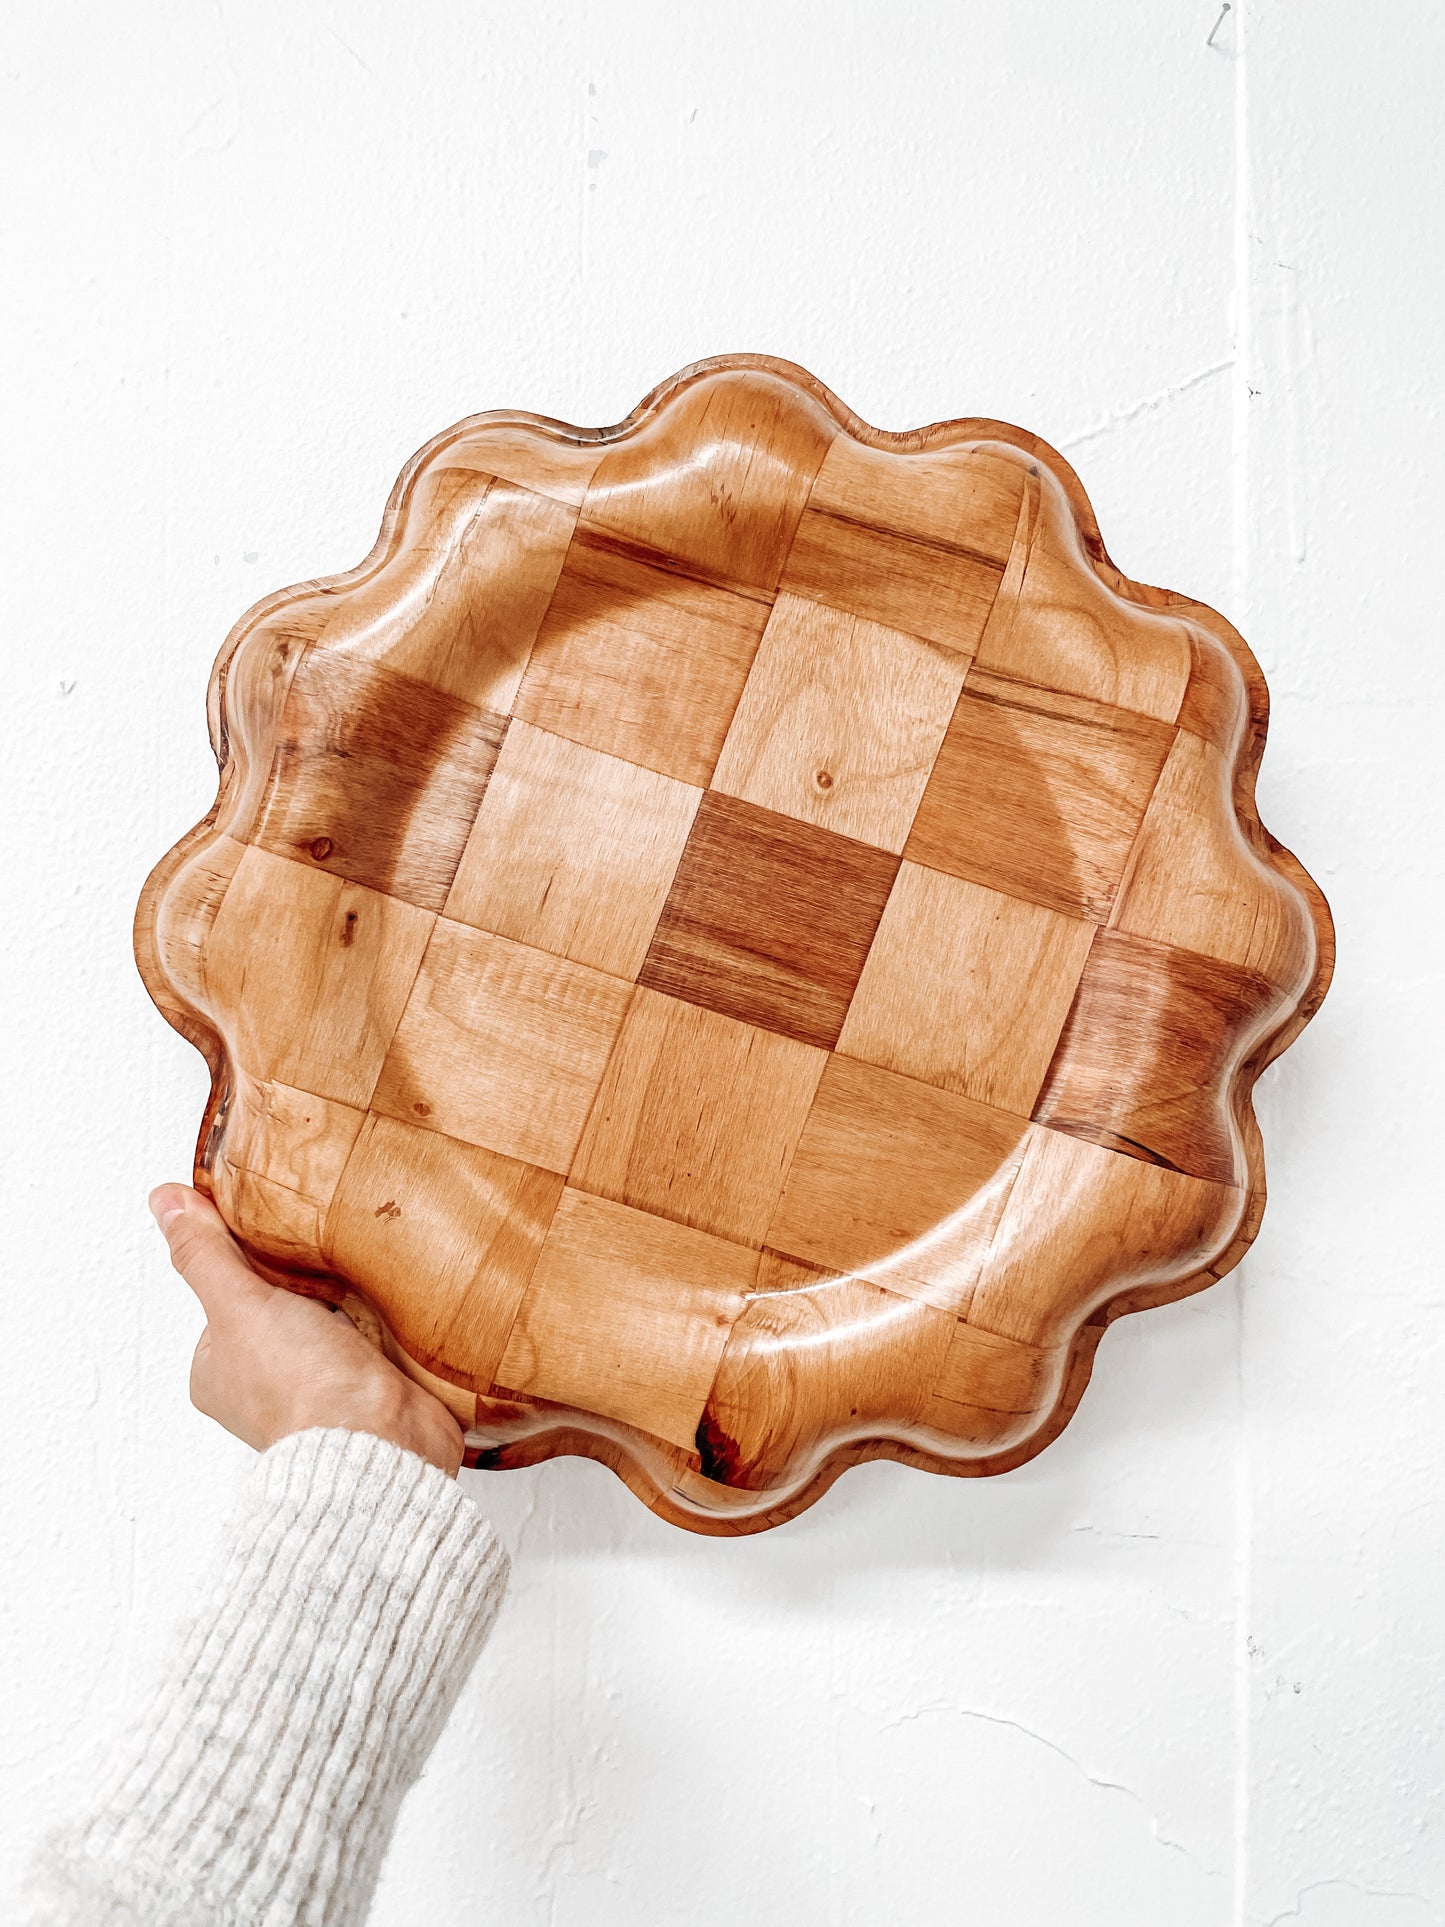 Scalloped Vintage Wood Tray